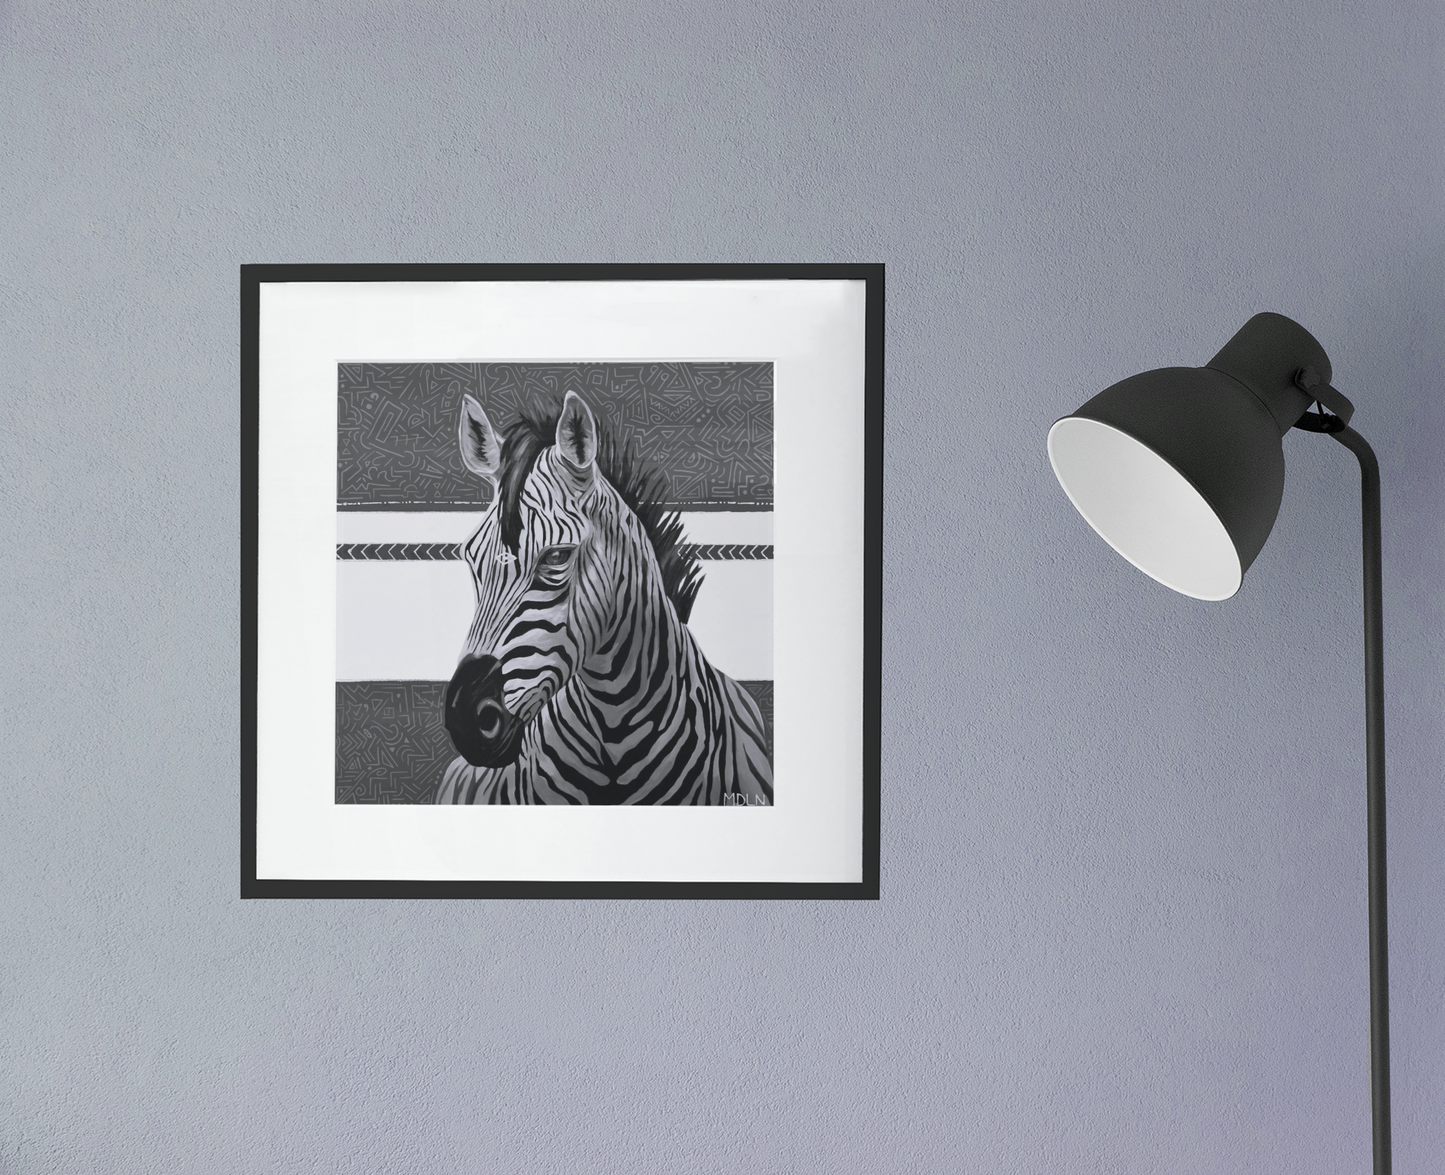 A black and white  giclee art print of a majestic zebra painting with abstract background, zebra art framed in black with white matting, hanging on a wall next to a lamp